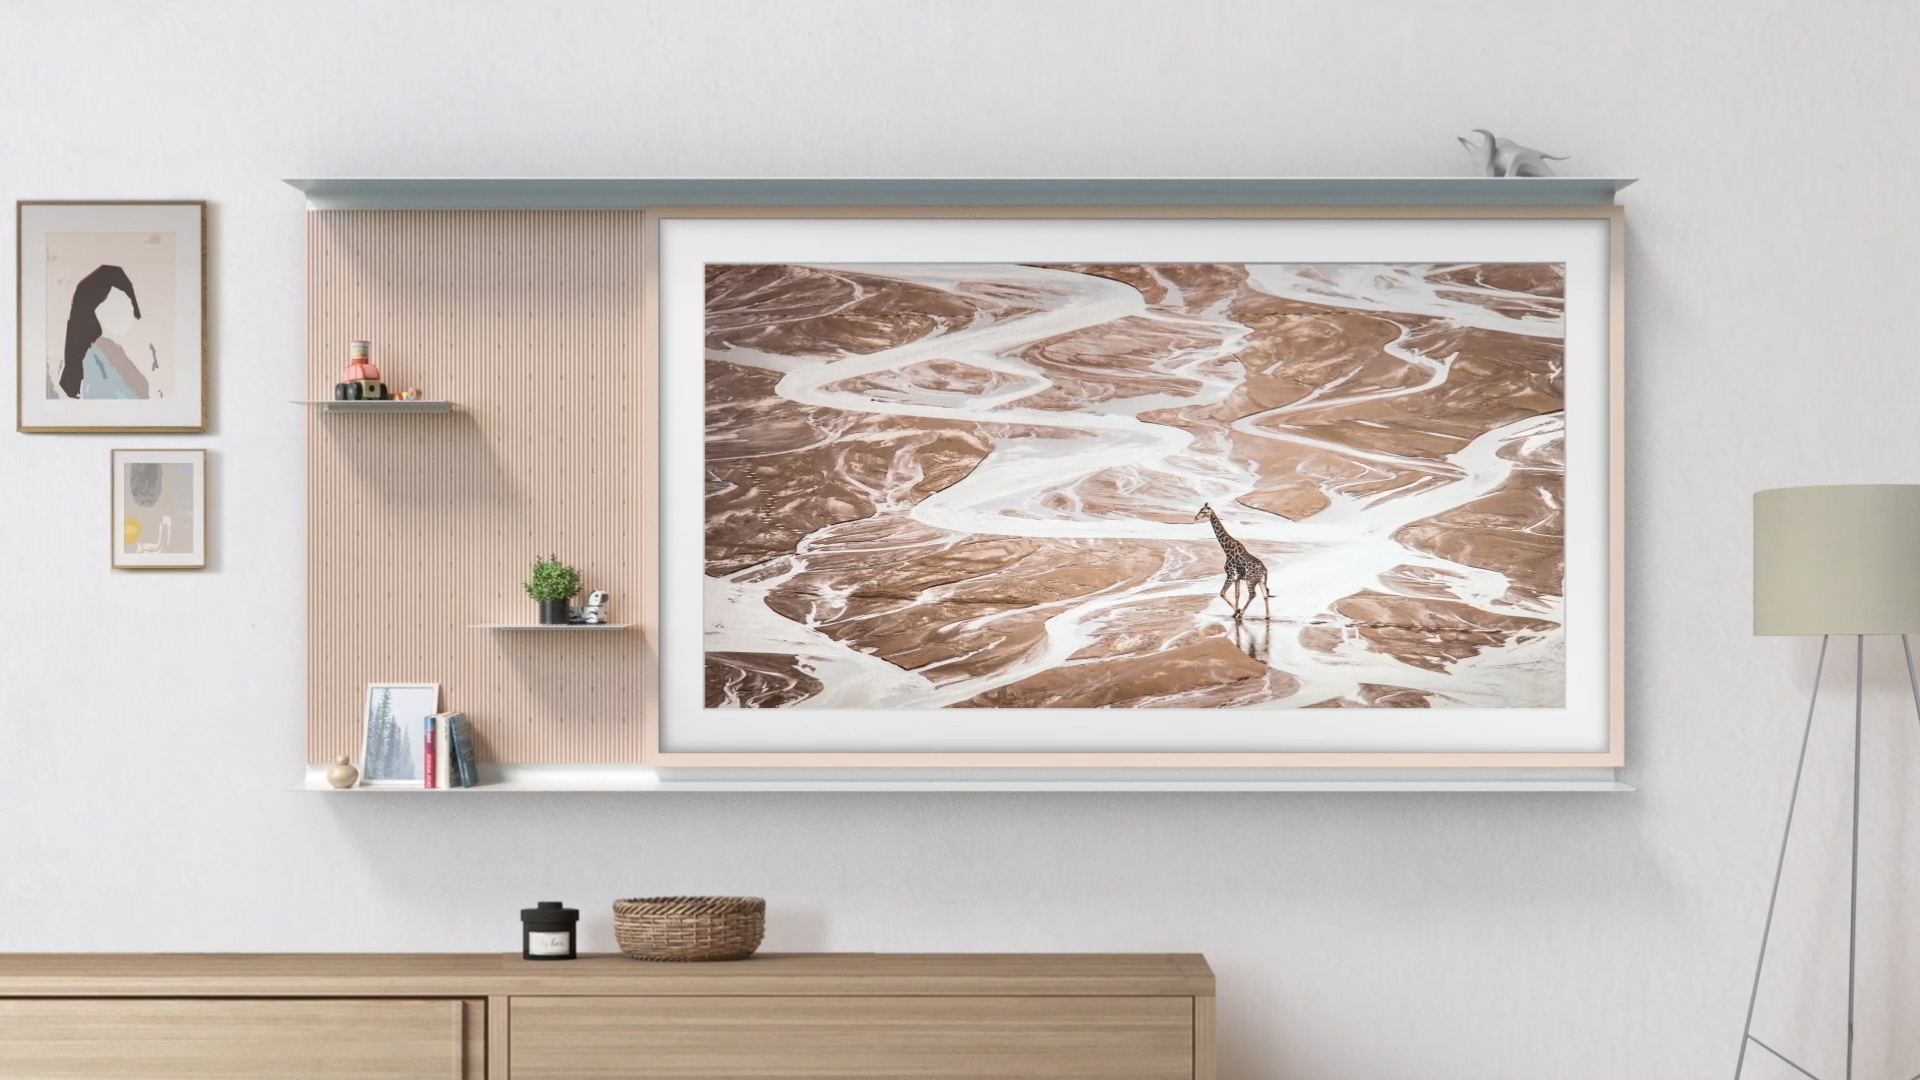 Samsung The Frame gets a new TV accessory and it's literally a shelf